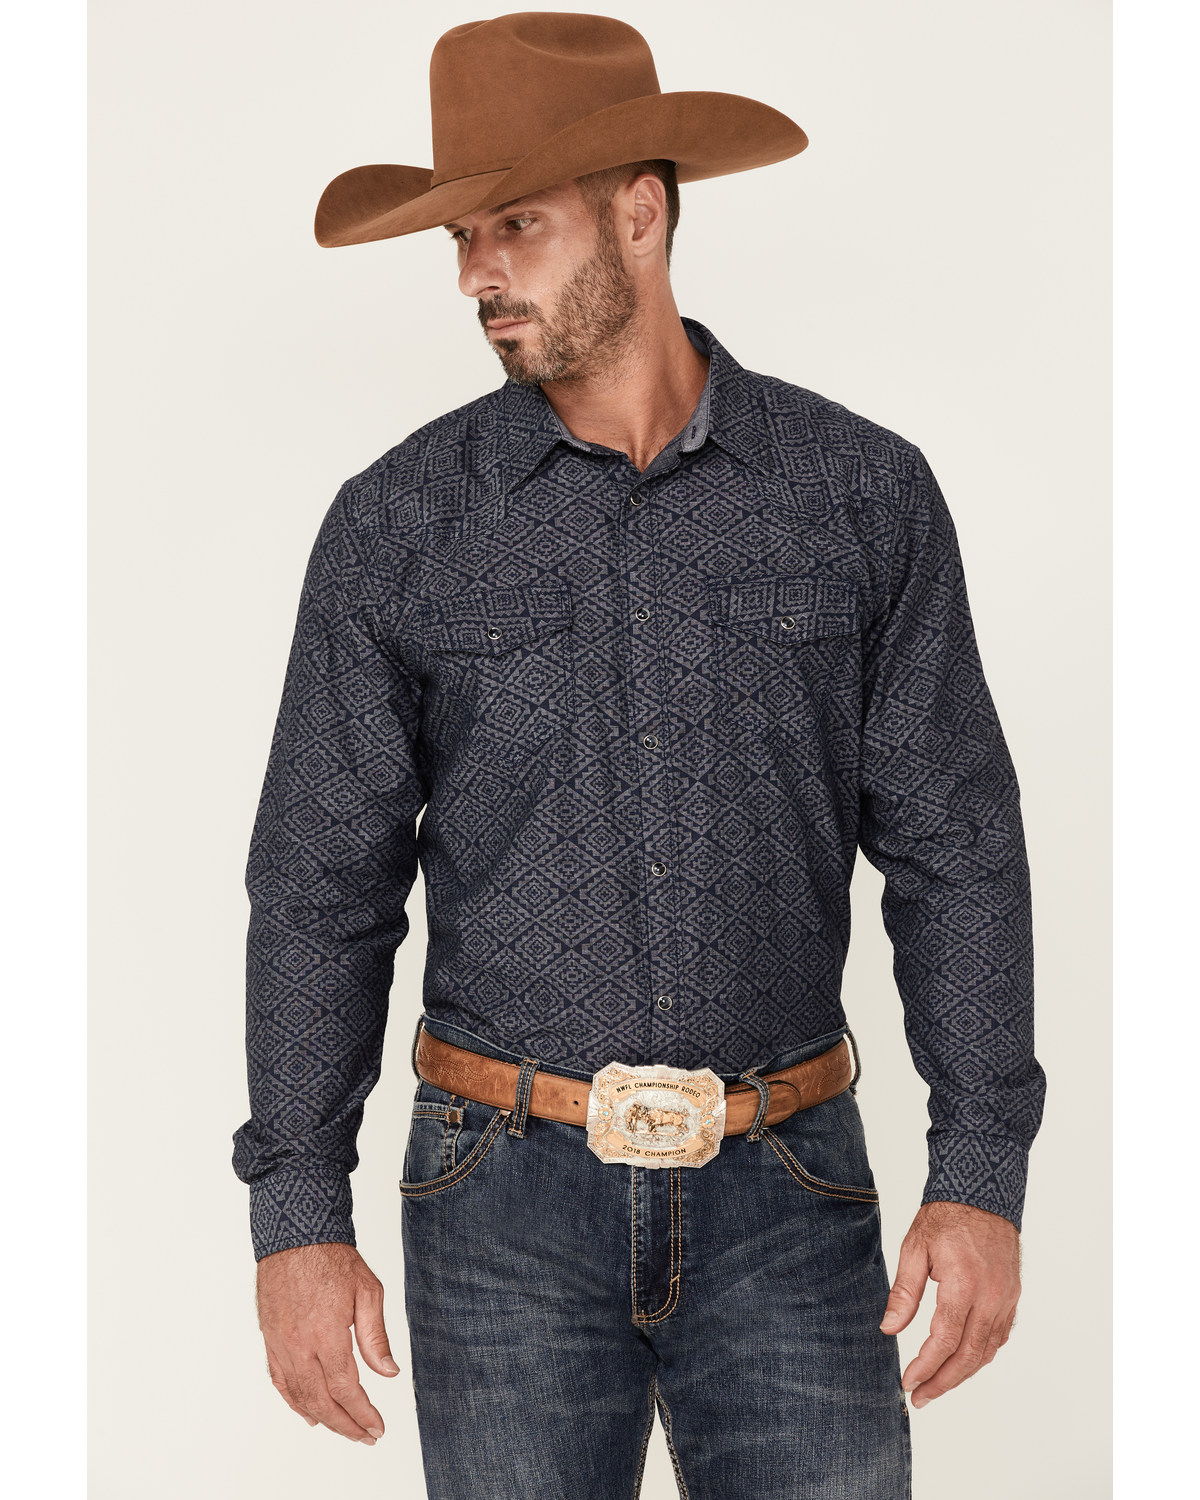 Cody James Men's Washed Out Chambray Southwestern Print Long Sleeve Snap Western Shirt